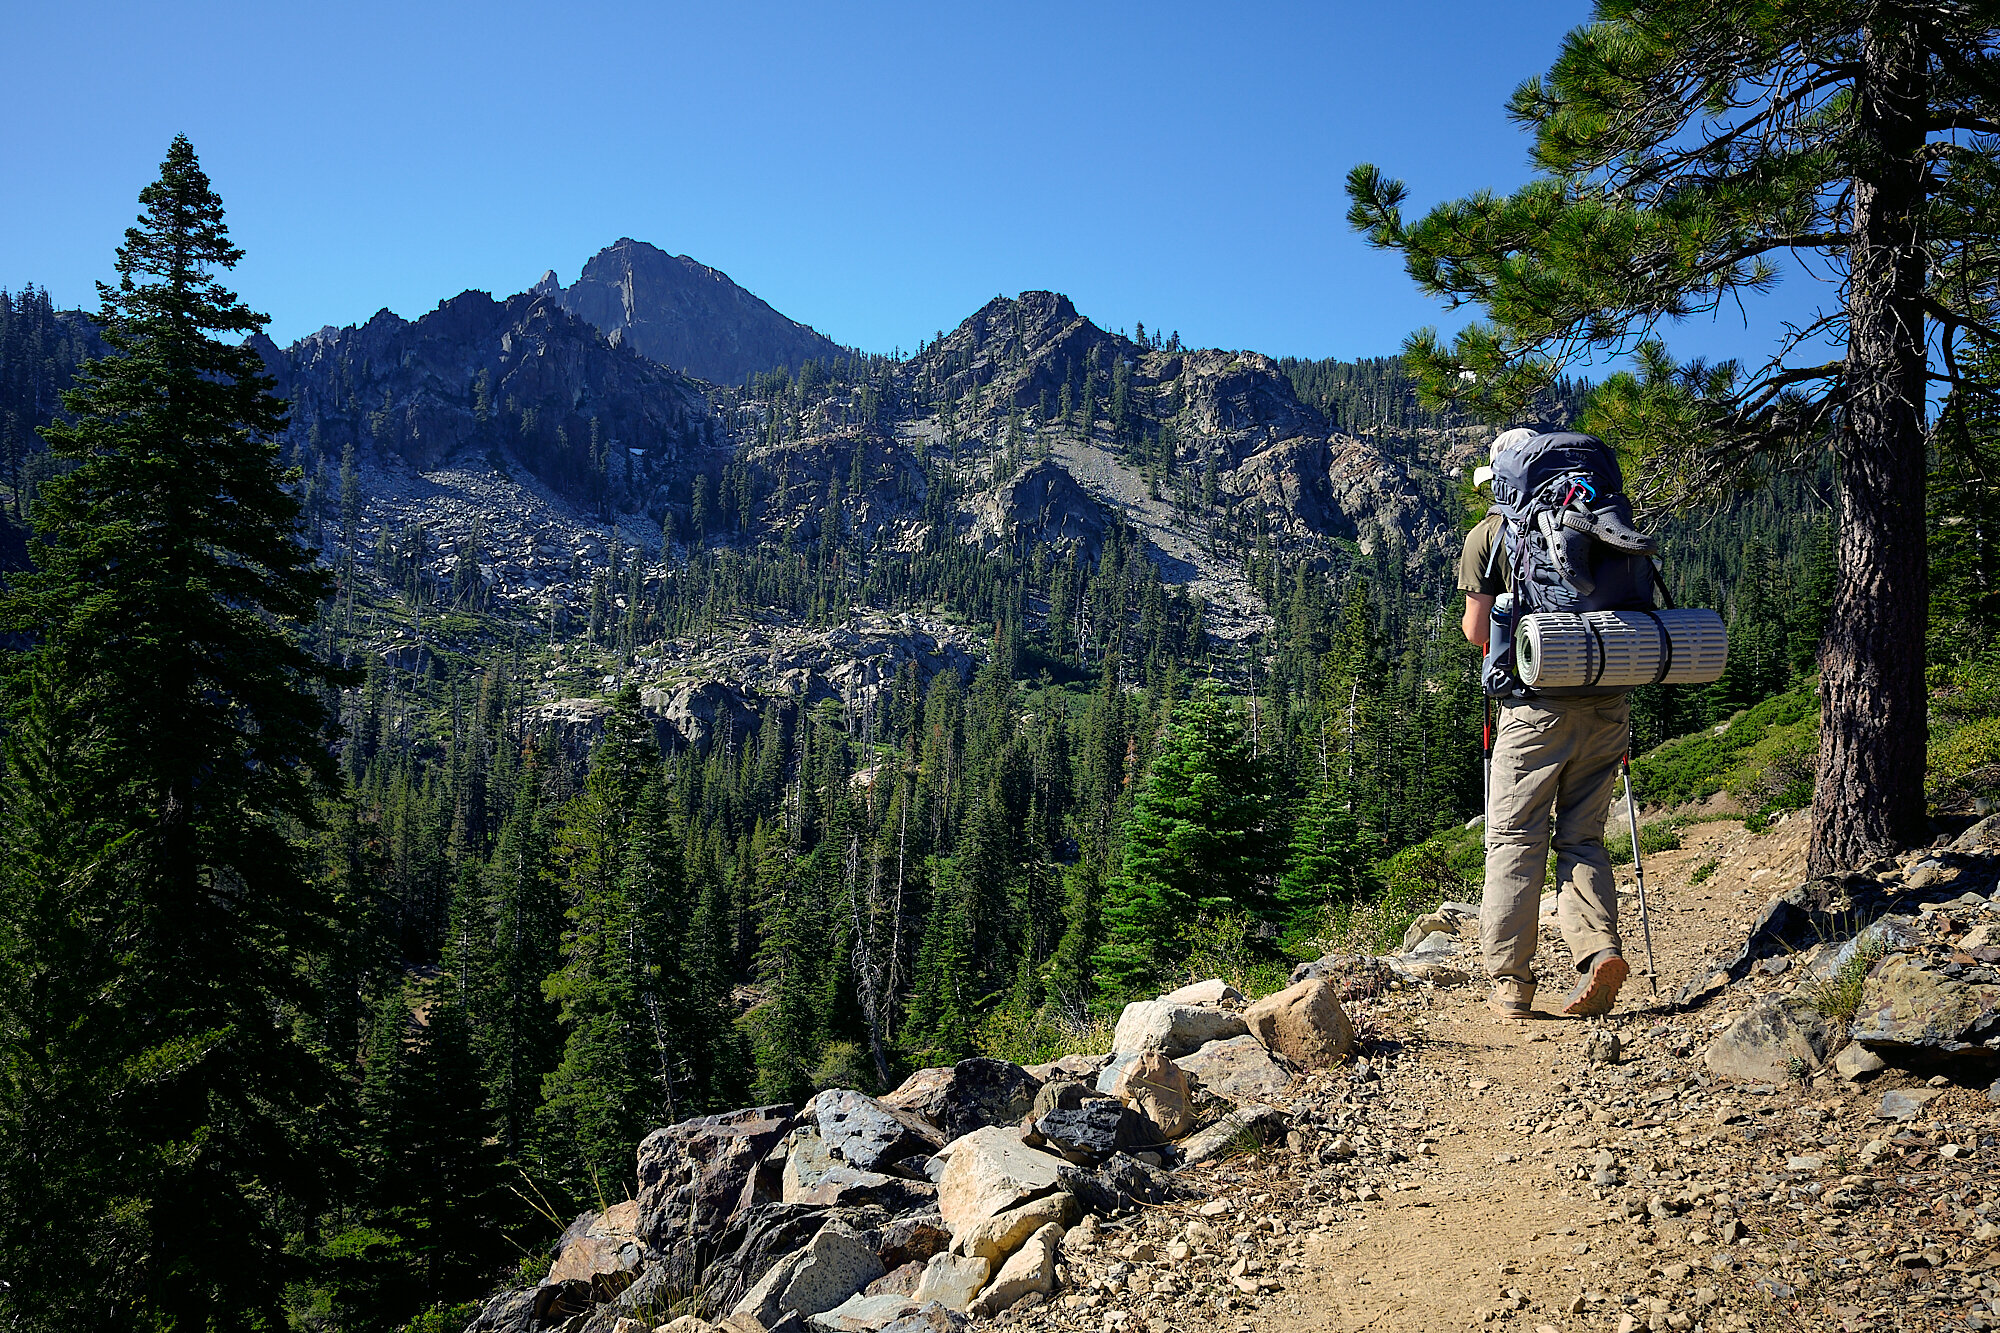  My brother Gabriel and my Dad came out to hike the Northern Sierra for a week. Here Gabriel descends from the Sierra Buttes. | 7/29/19 Mile 1,205.6 7,400' 